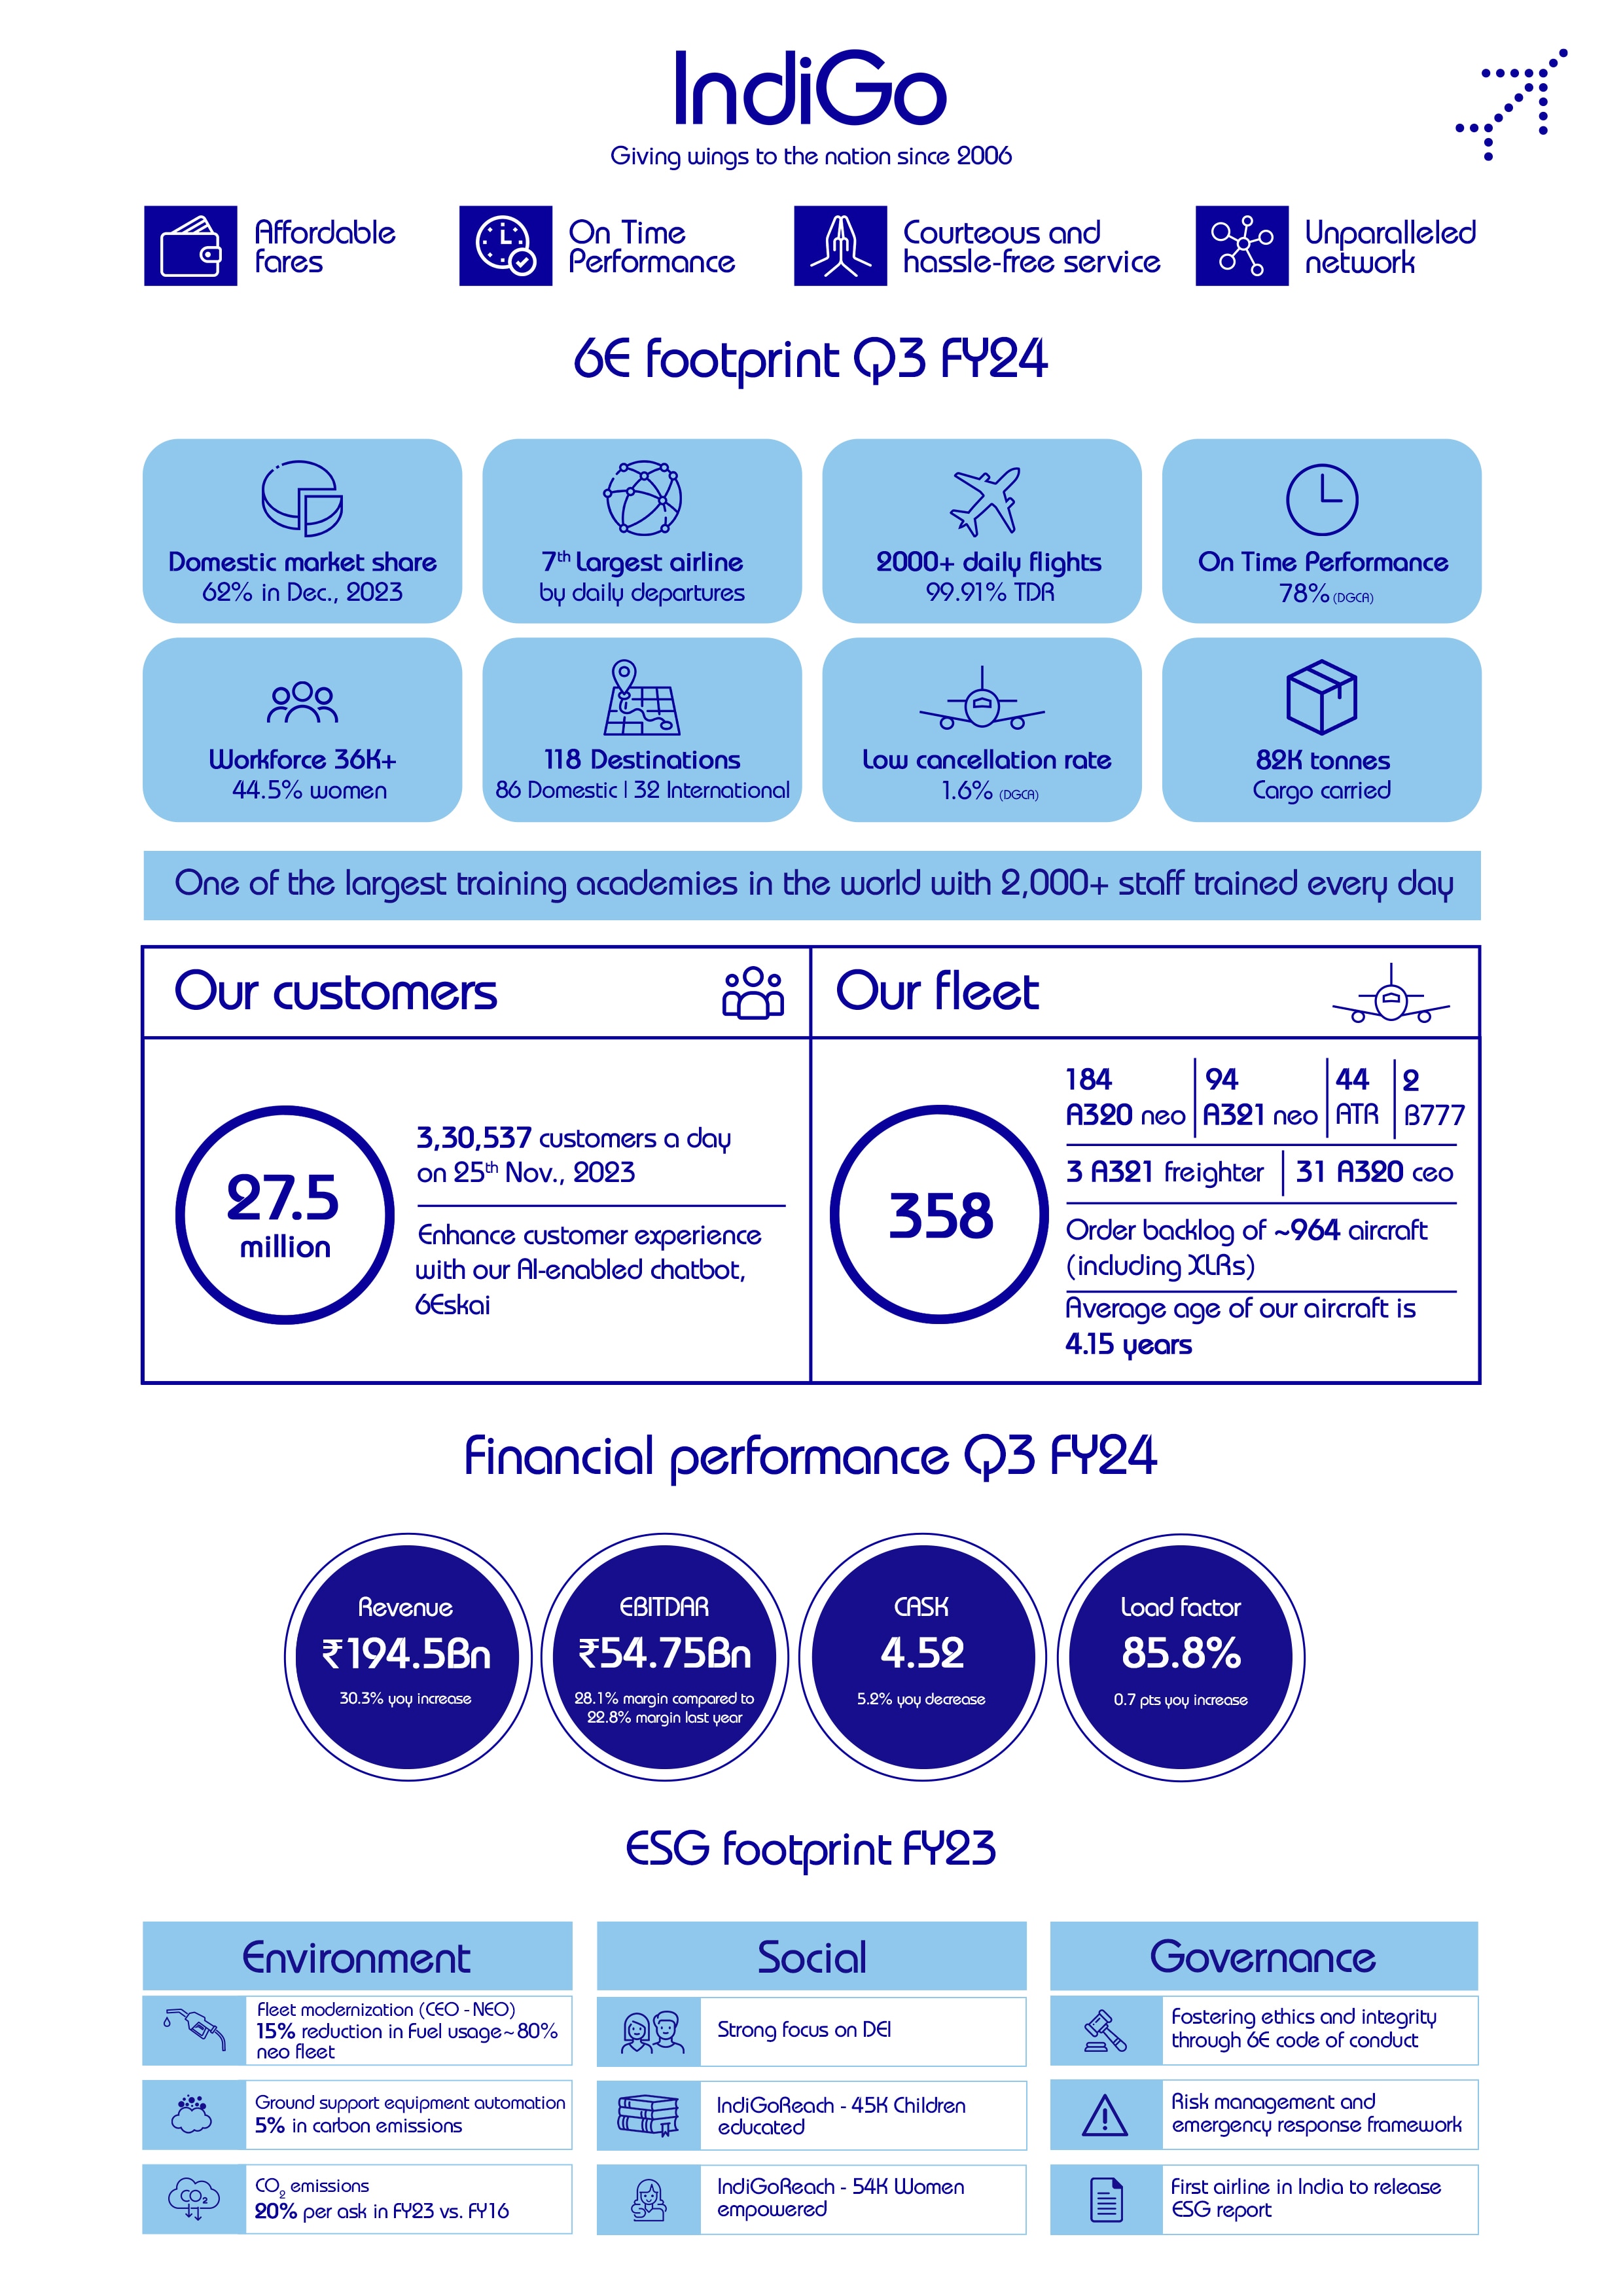 Highlights of FY23 performance